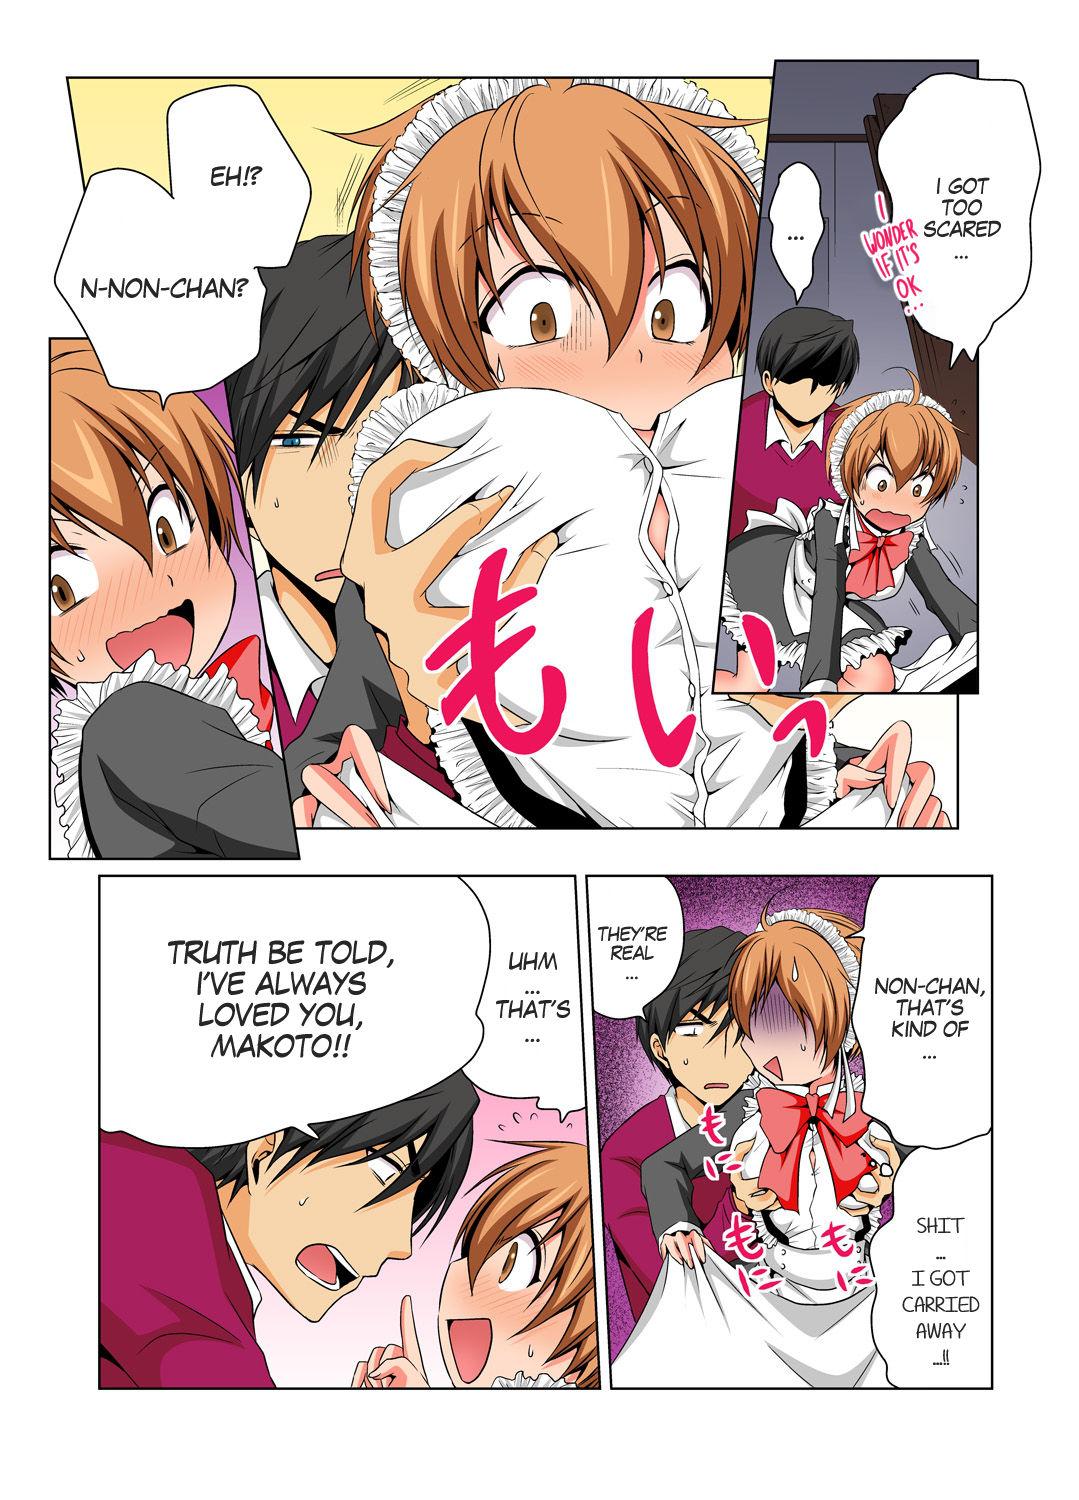 Real Orgasms Nyotaika de Ecchi Kenshin!? Mirudake tte Itta no ni... 6 | Gender Bender Into Sexy Medical Examination! You said that you were only going to look... 6 Cop - Page 6